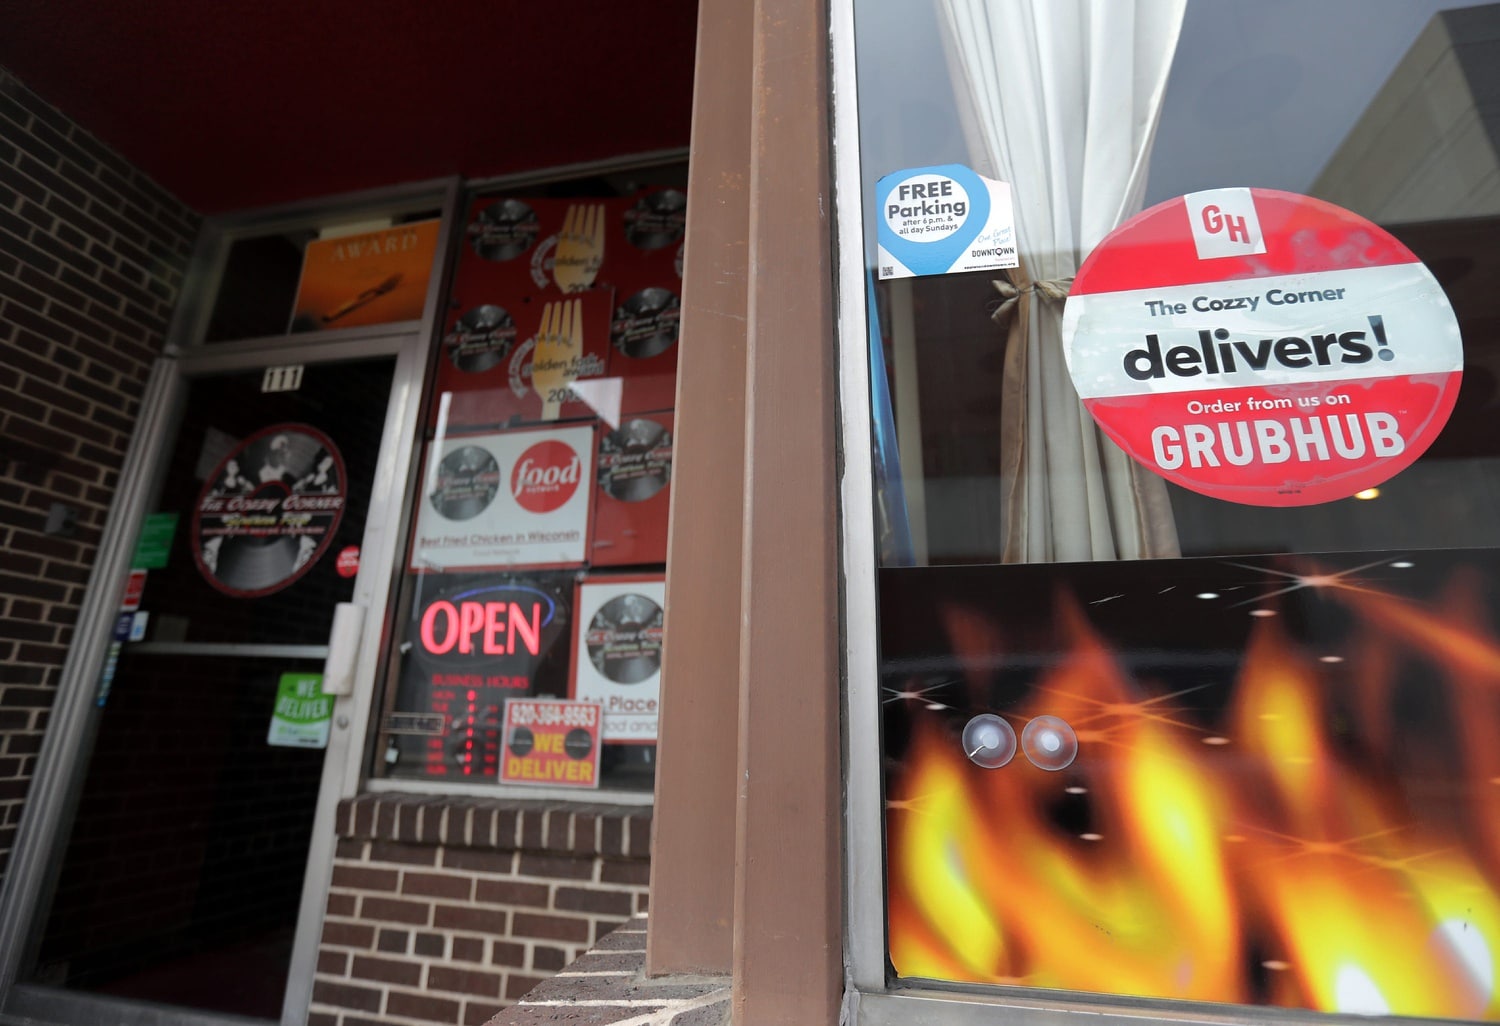 If You Thought Grubhub Was Over-Charging You in Philadelphia, it Turns Out You Were Right